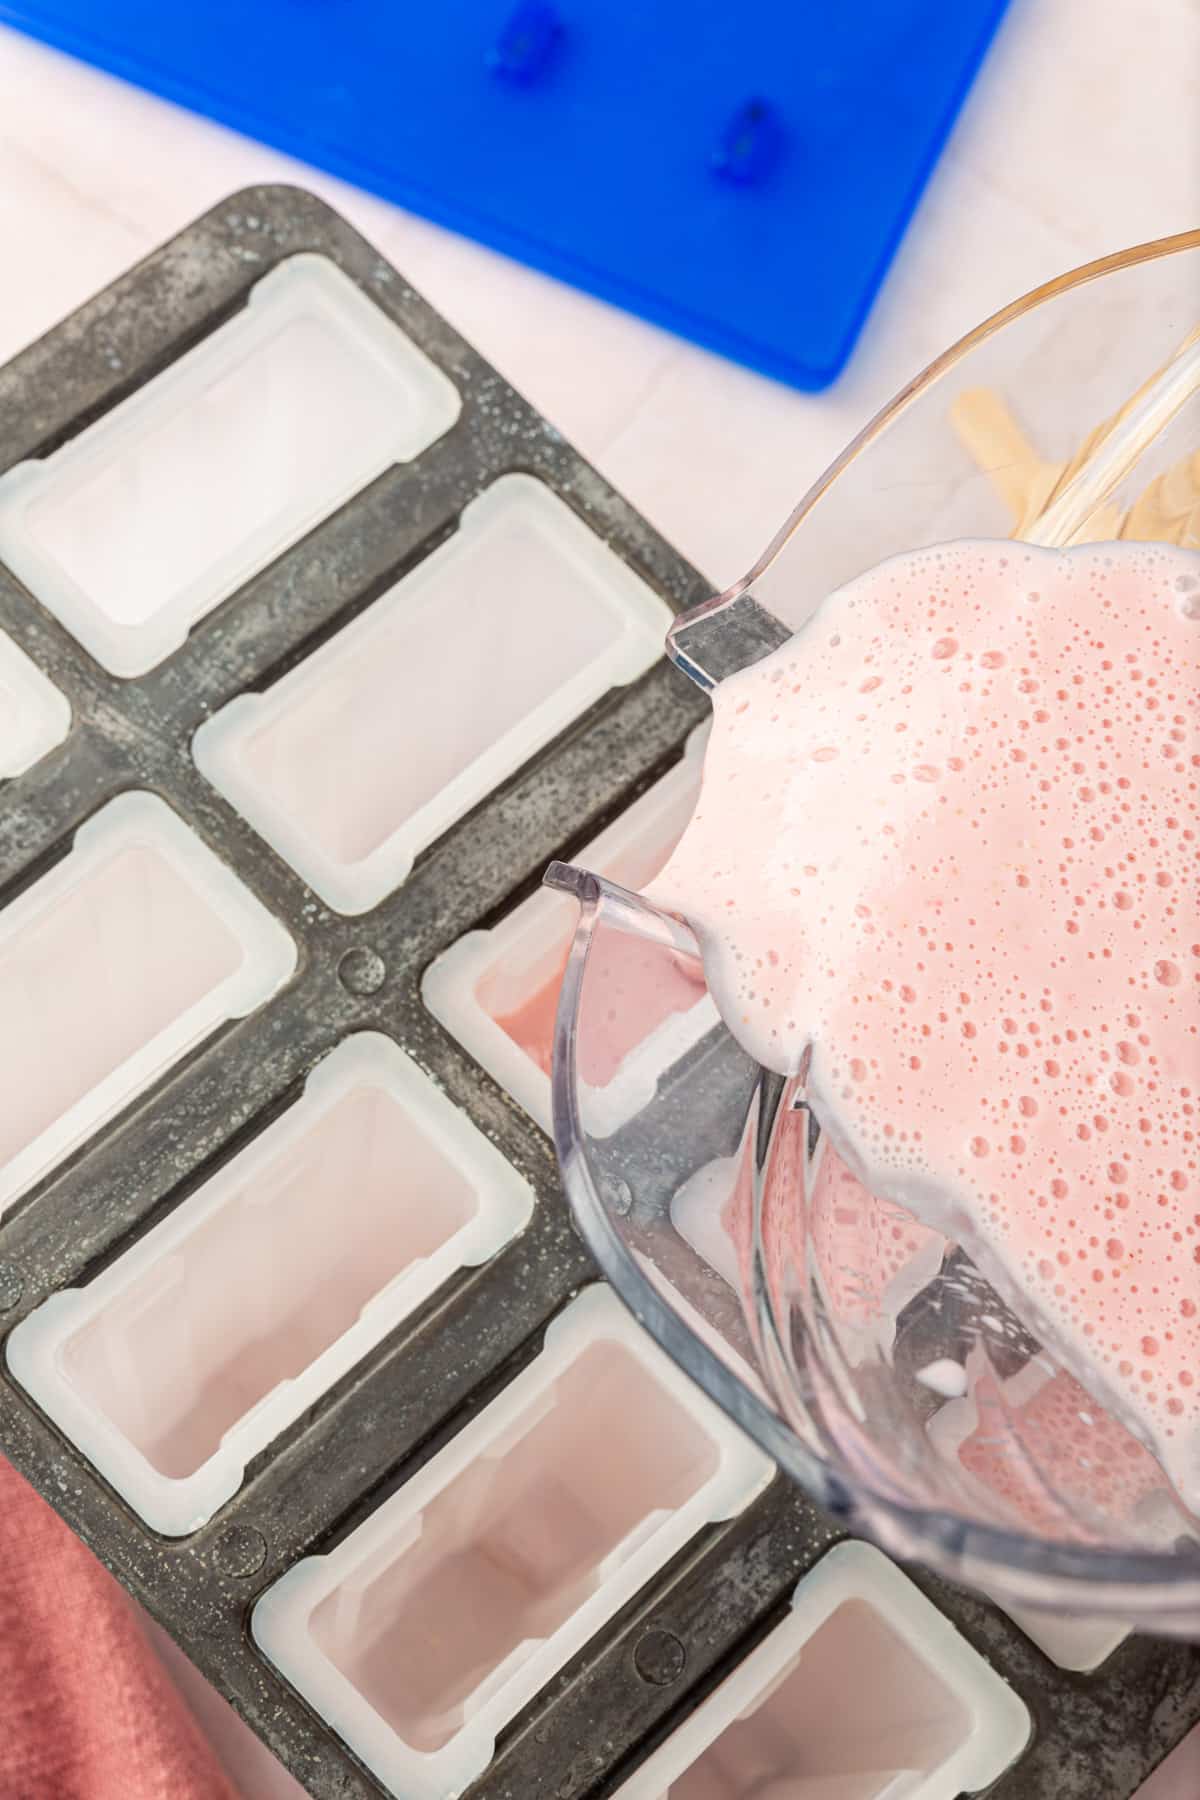 A blender pouring a strawberry yogurt mixture into popsicle molds.